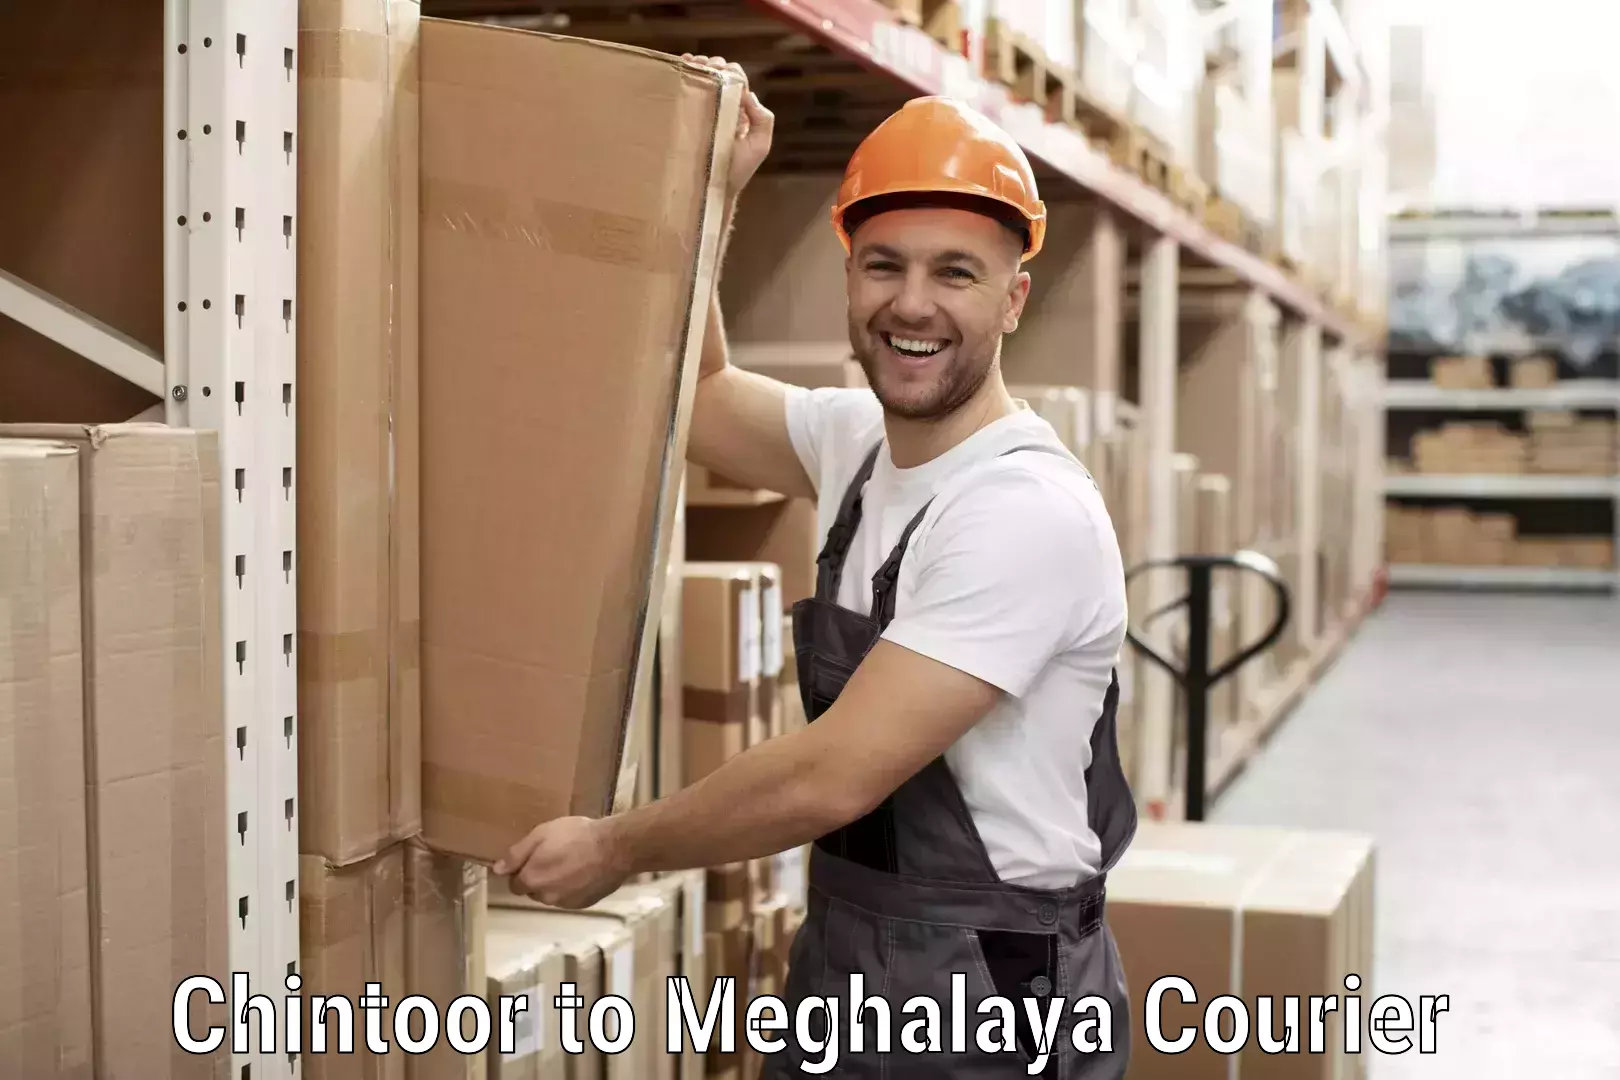 Multi-national courier services Chintoor to Shillong